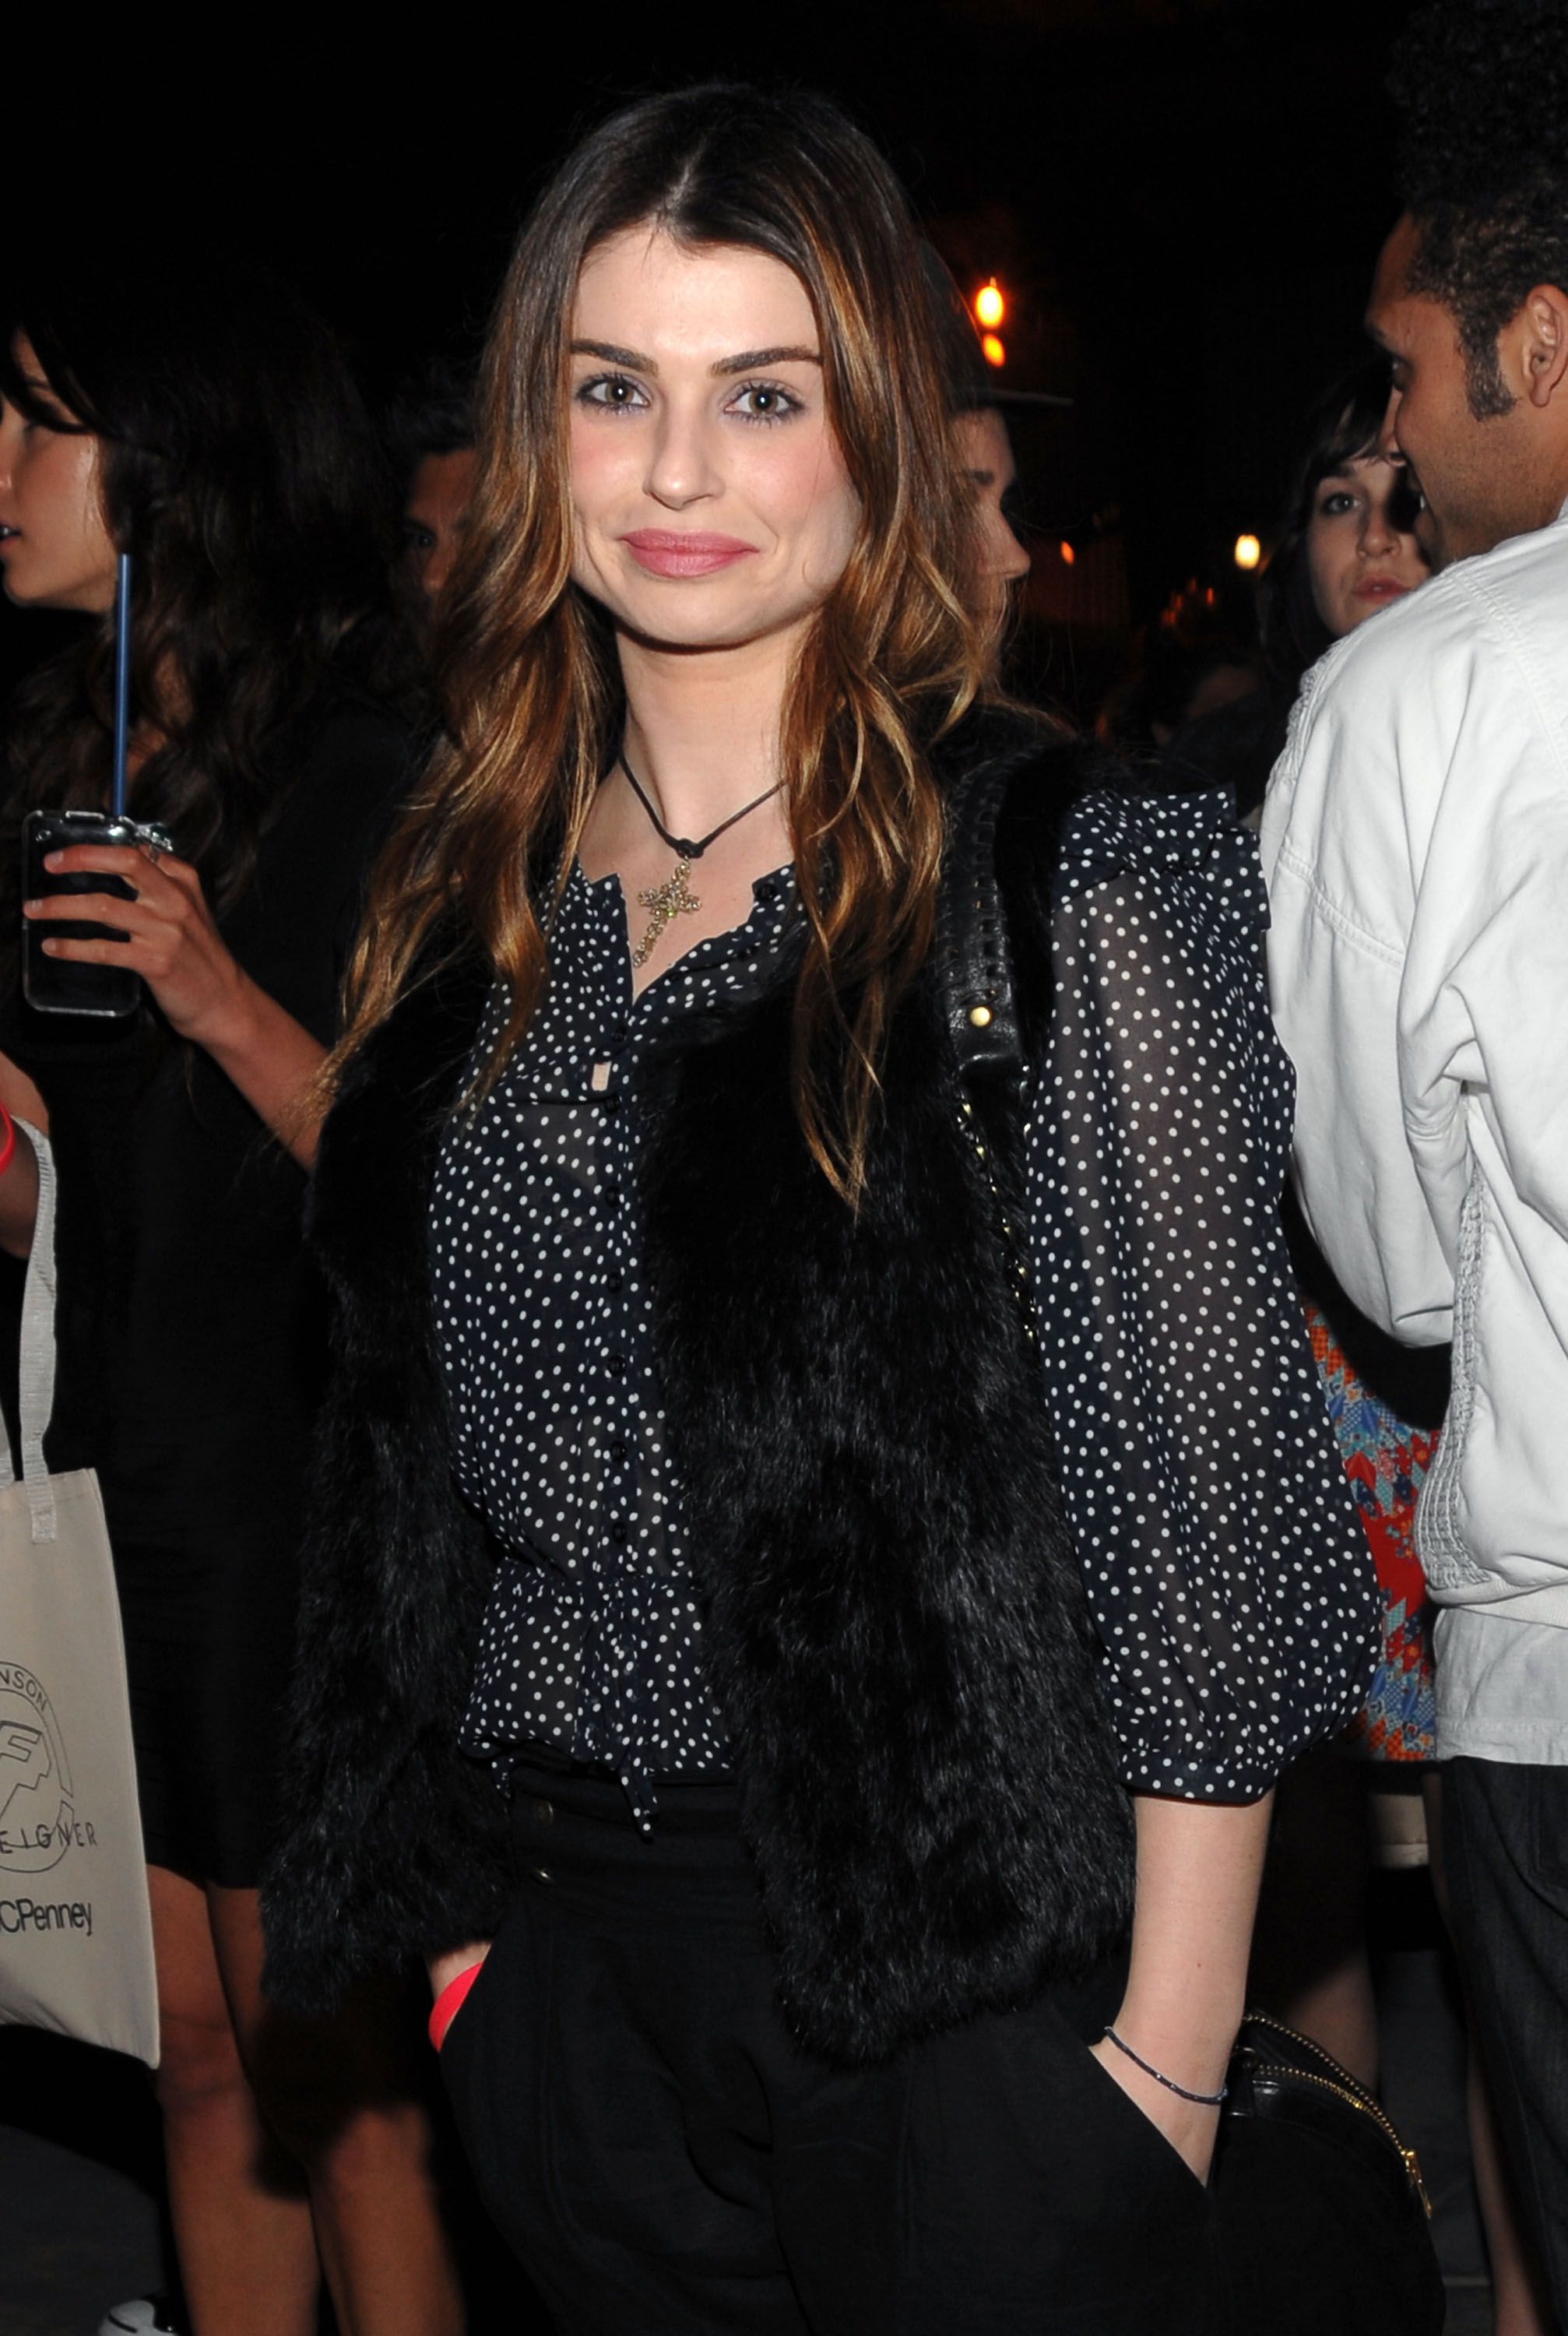 Aimee Osbourne at the Charlotte Ronson and JCPenney Spring Cocktail Jam in Los Angeles, California in 2010. | Source: Getty Images